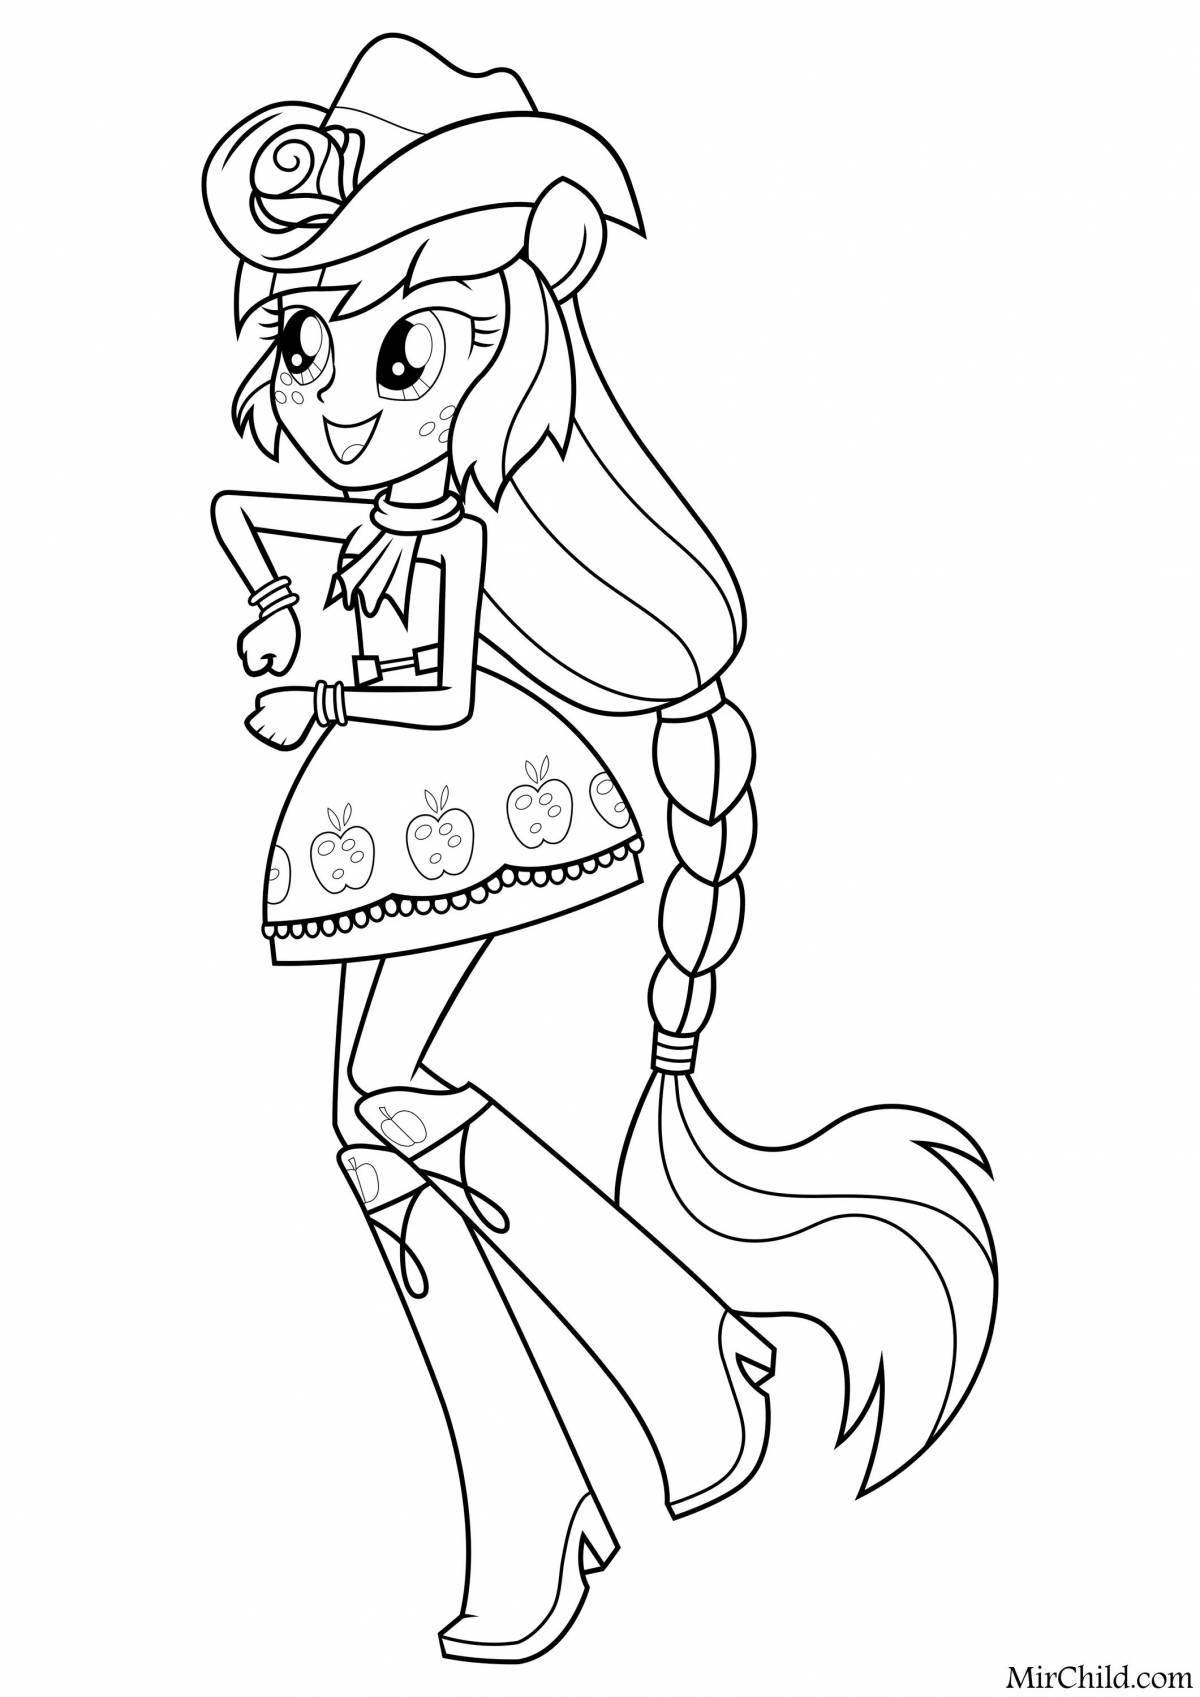 Coloring page pony equestria girls my little